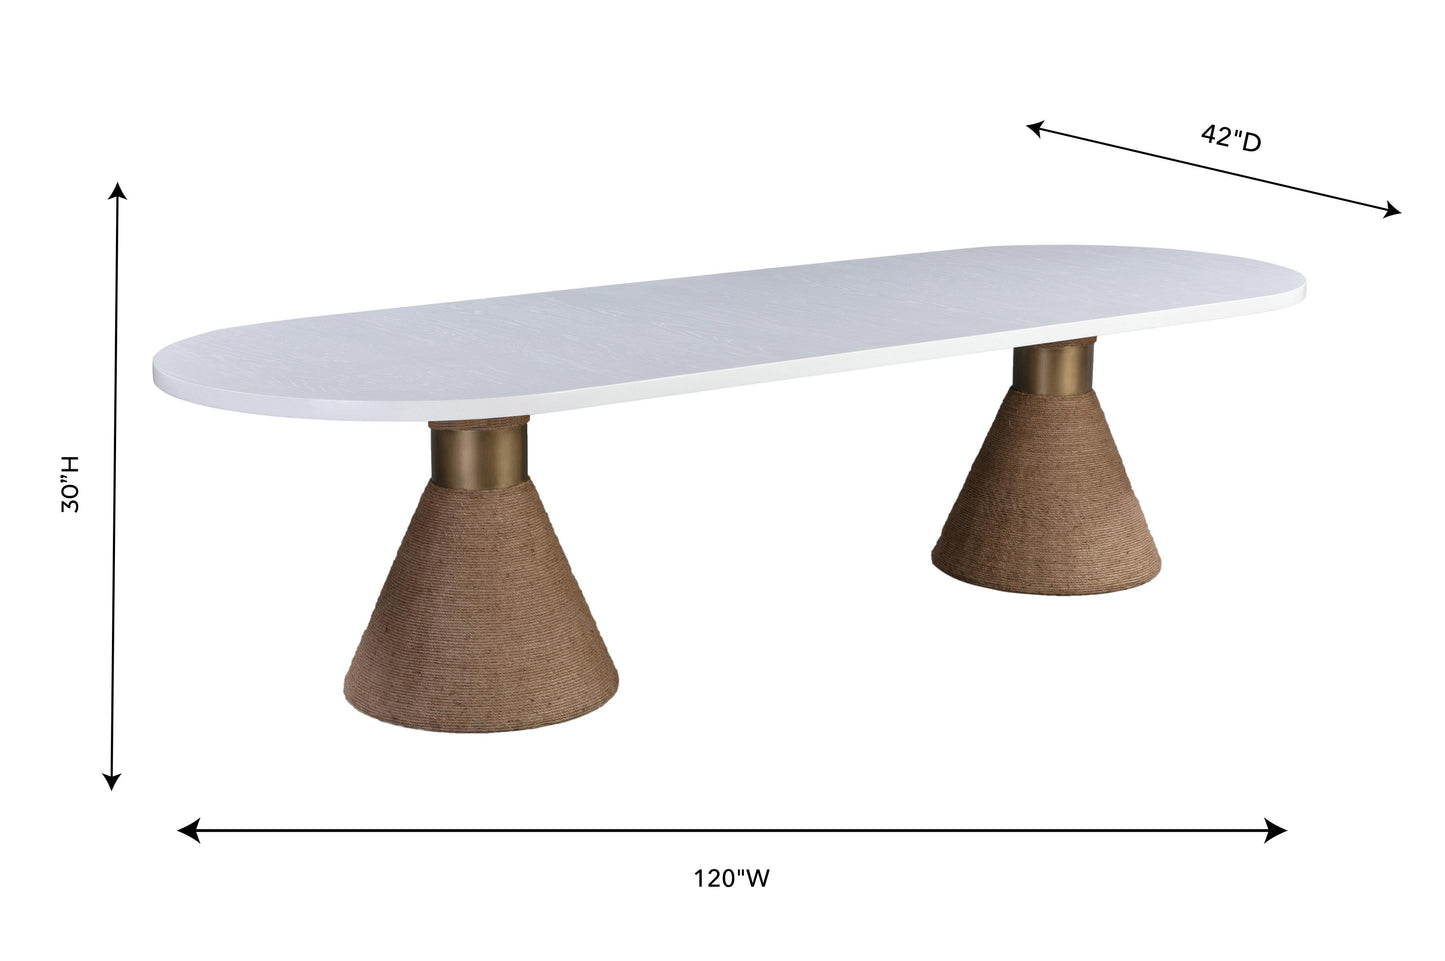 Rishi Natural Rope Oval Table by TOV